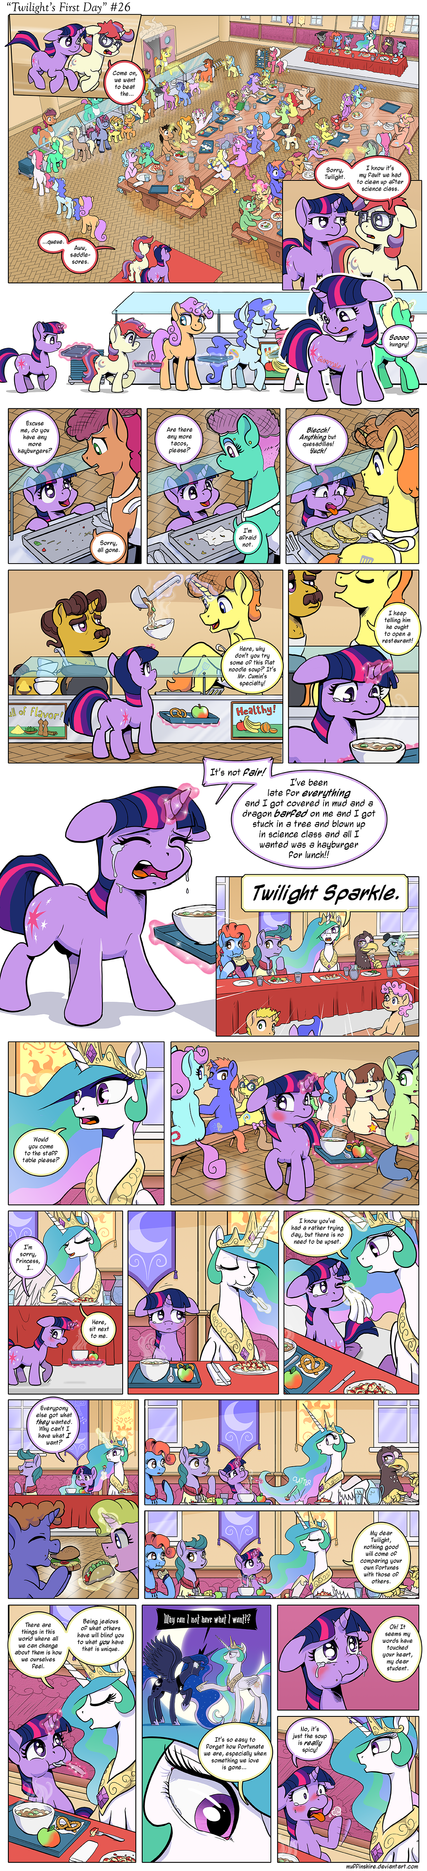 Comic - Twilight's First Day #26